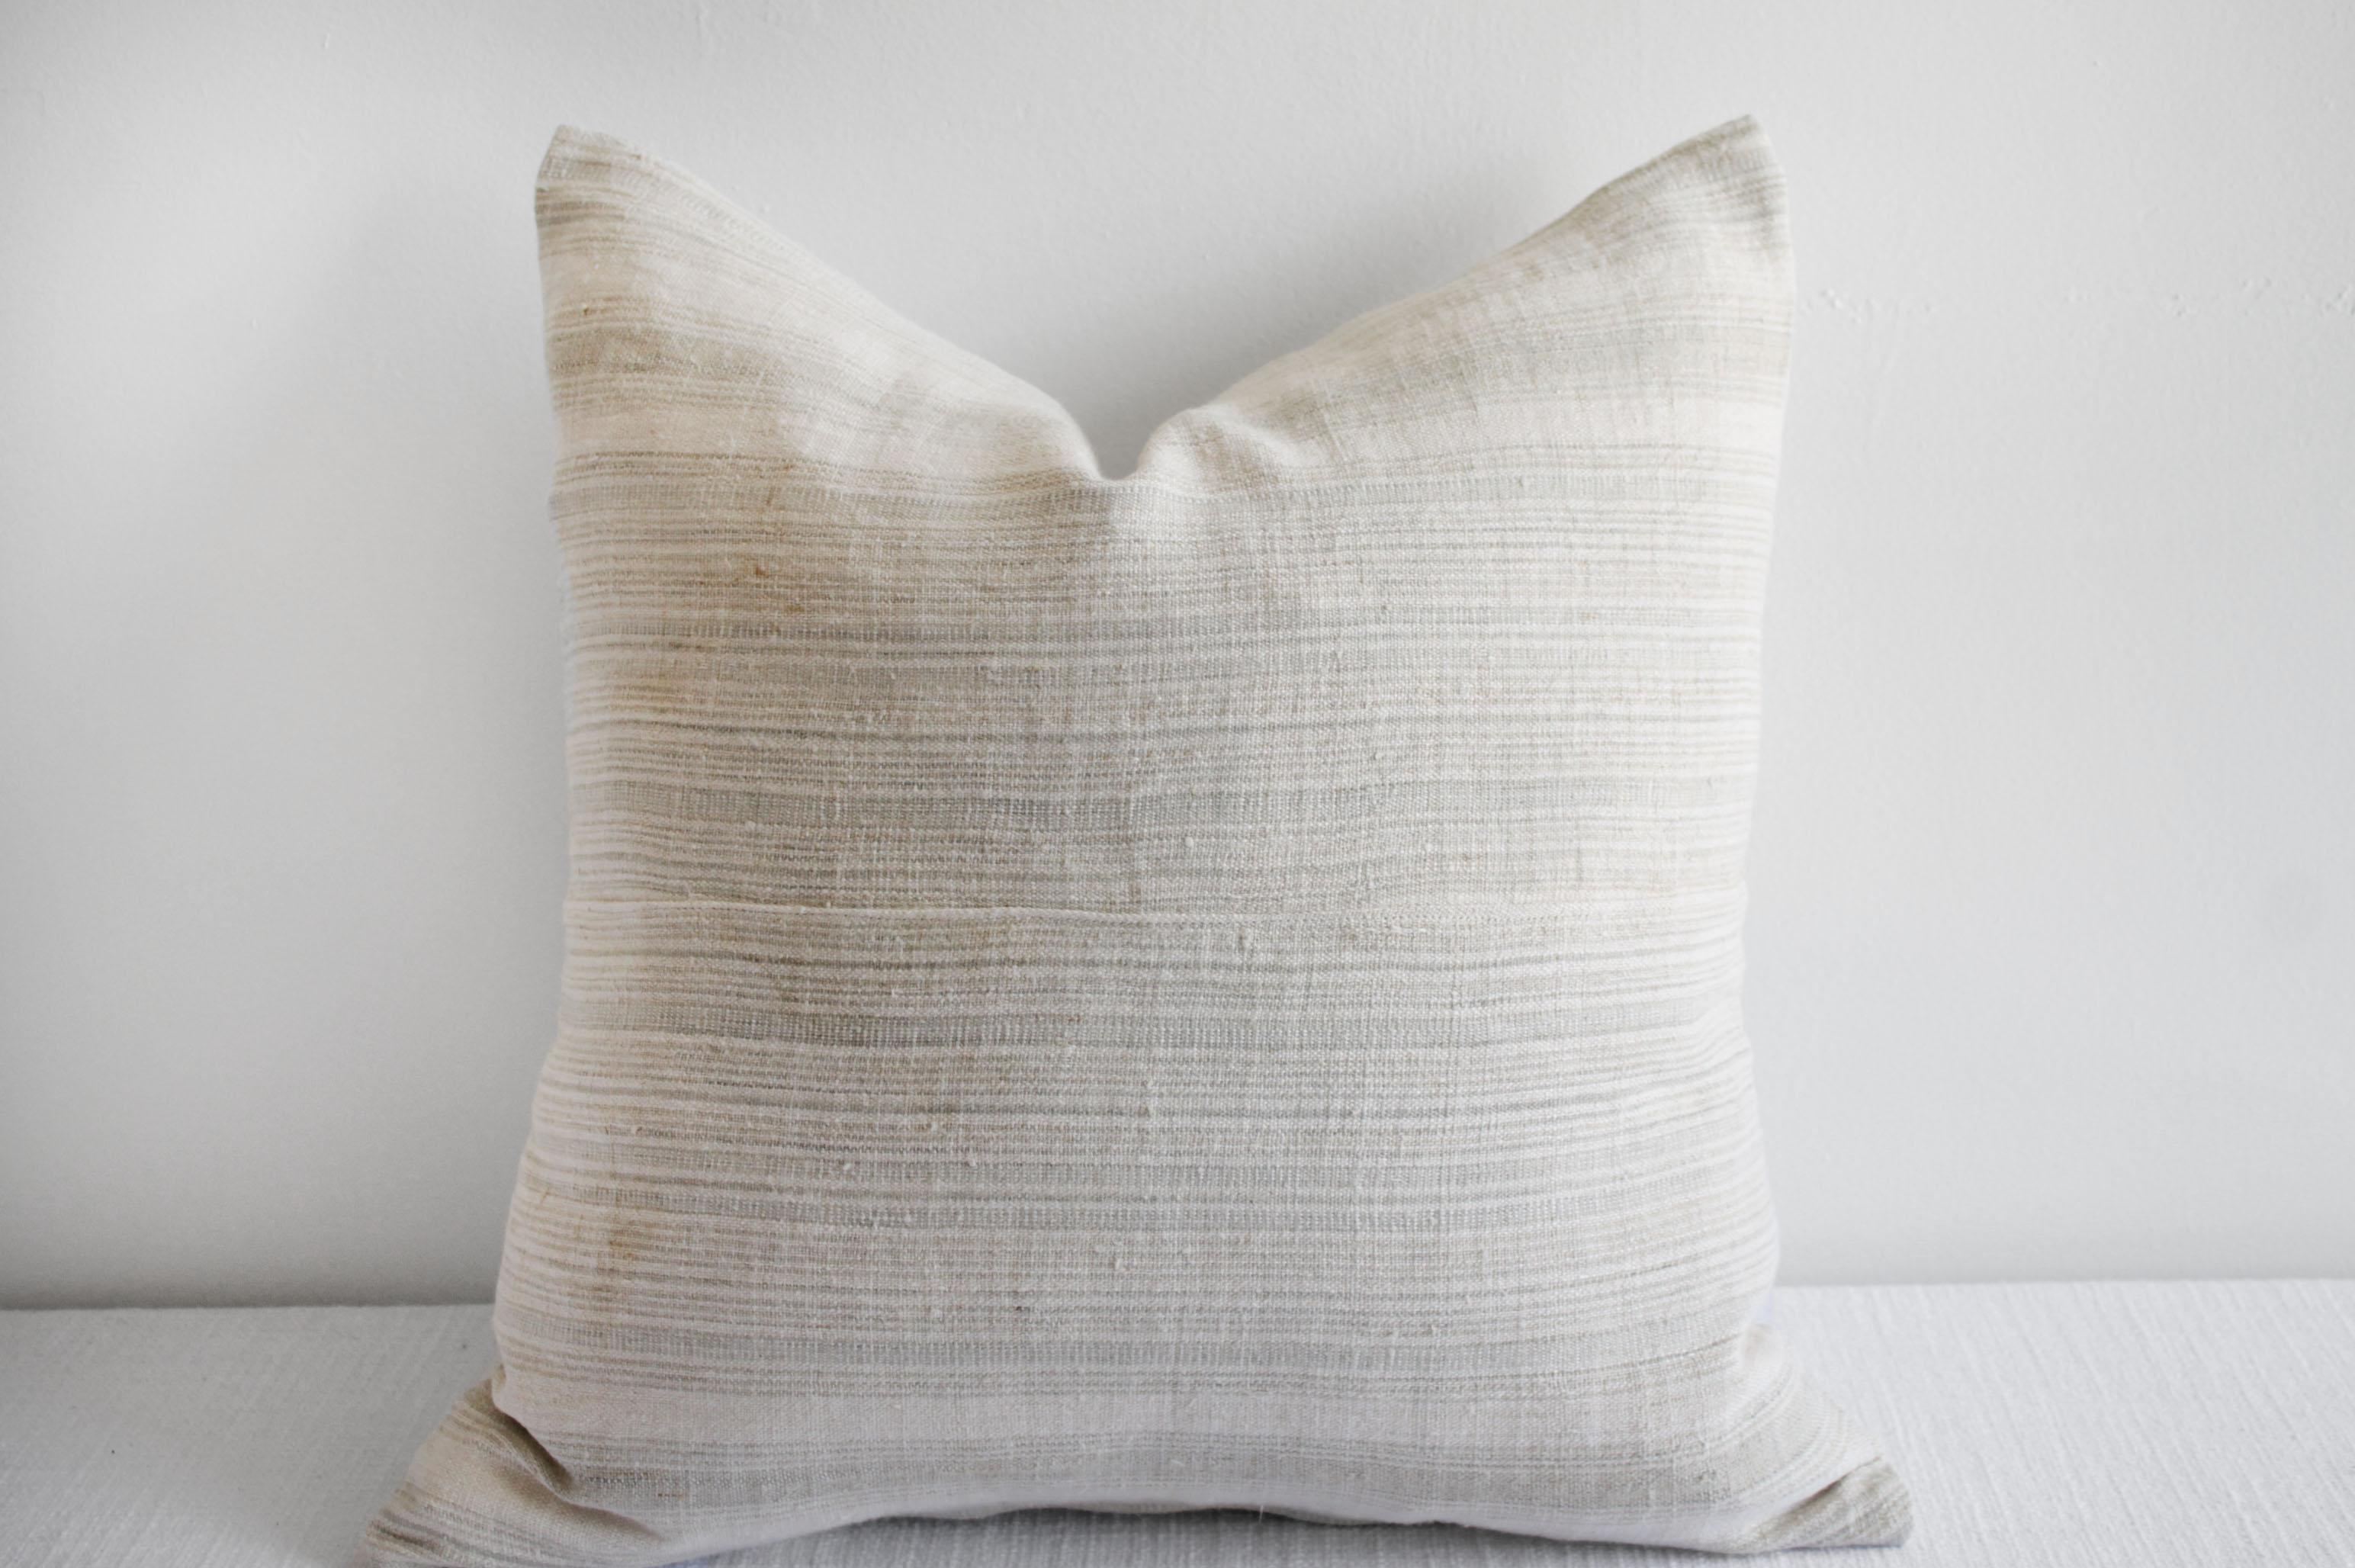 Vintage European stripe woven pillow, the backing is 100% Irish linen in natural linen. Our pillows are constructed with vintage one of a kind textiles from around the globe. Carefully constructed with the finest linens, with hidden zipper closure,